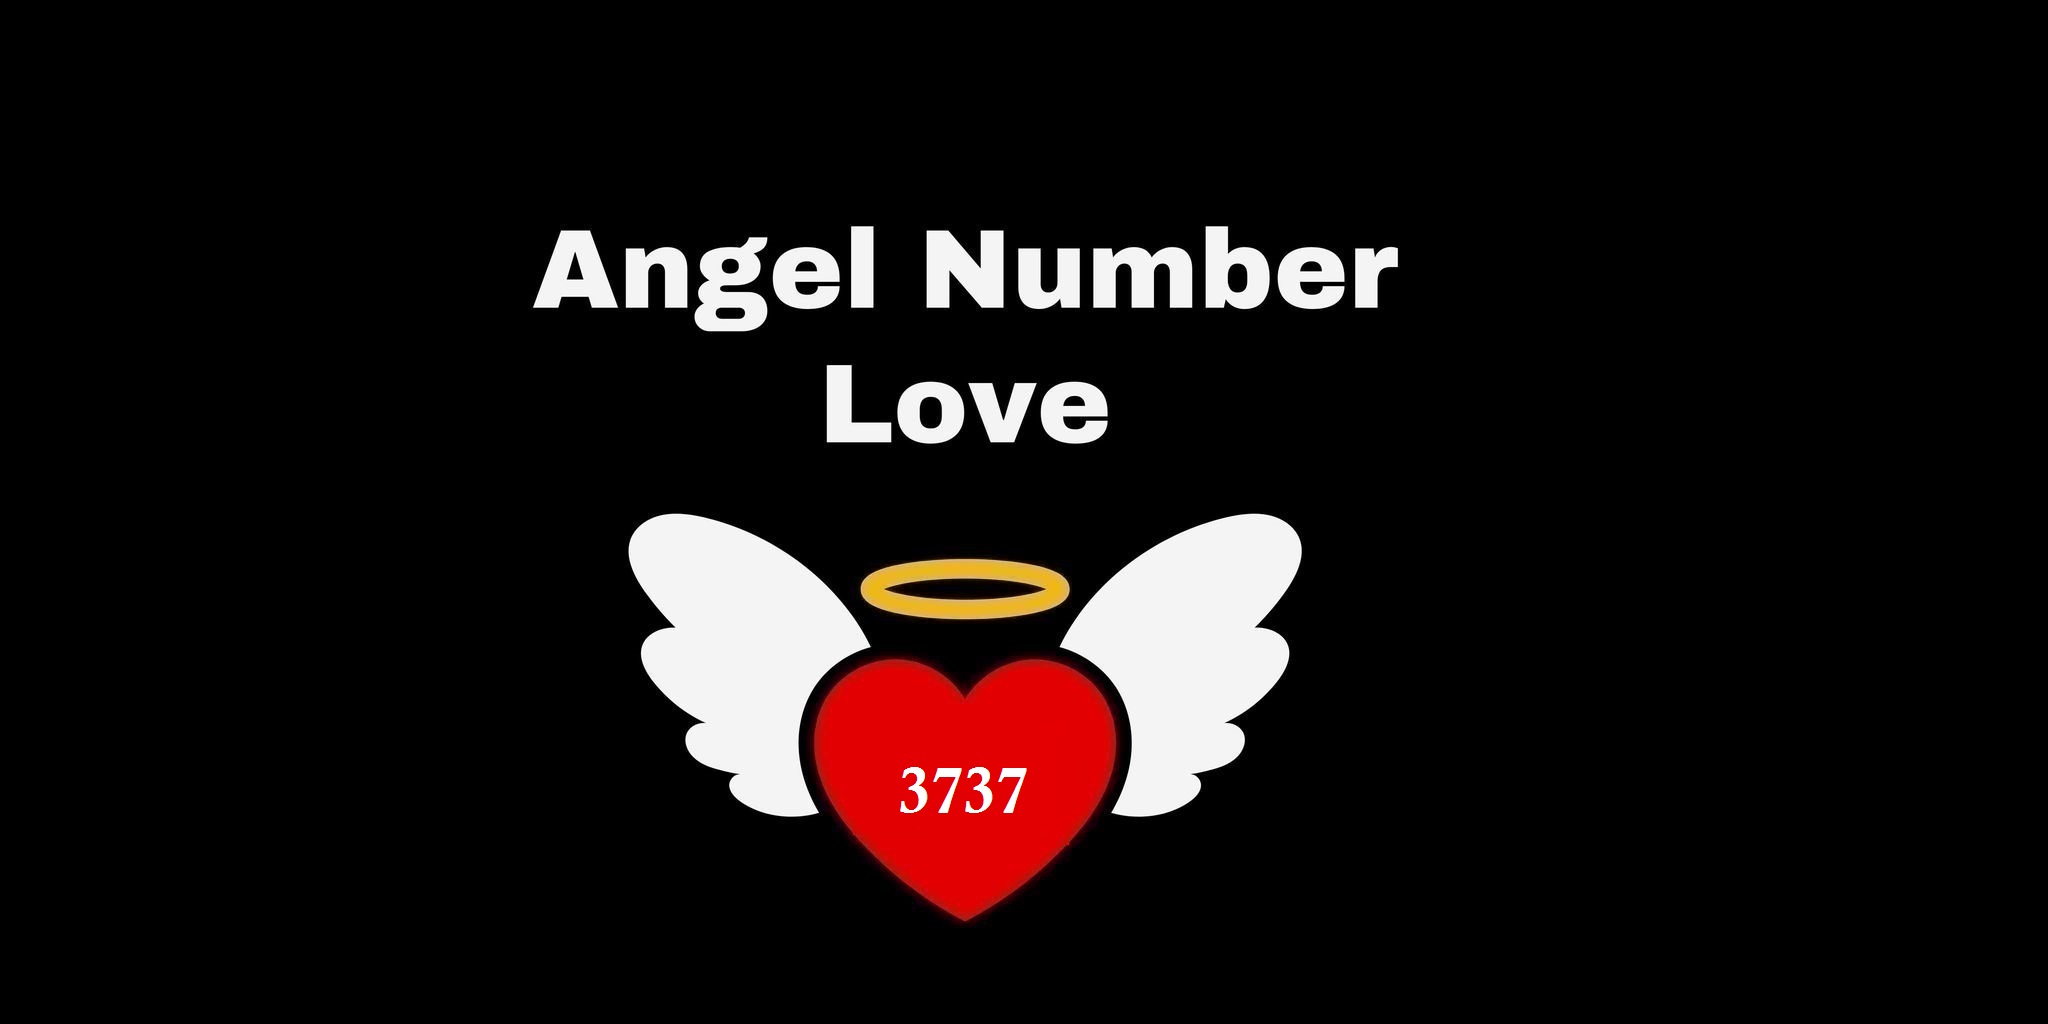 3737 Angel Number Meaning In Love